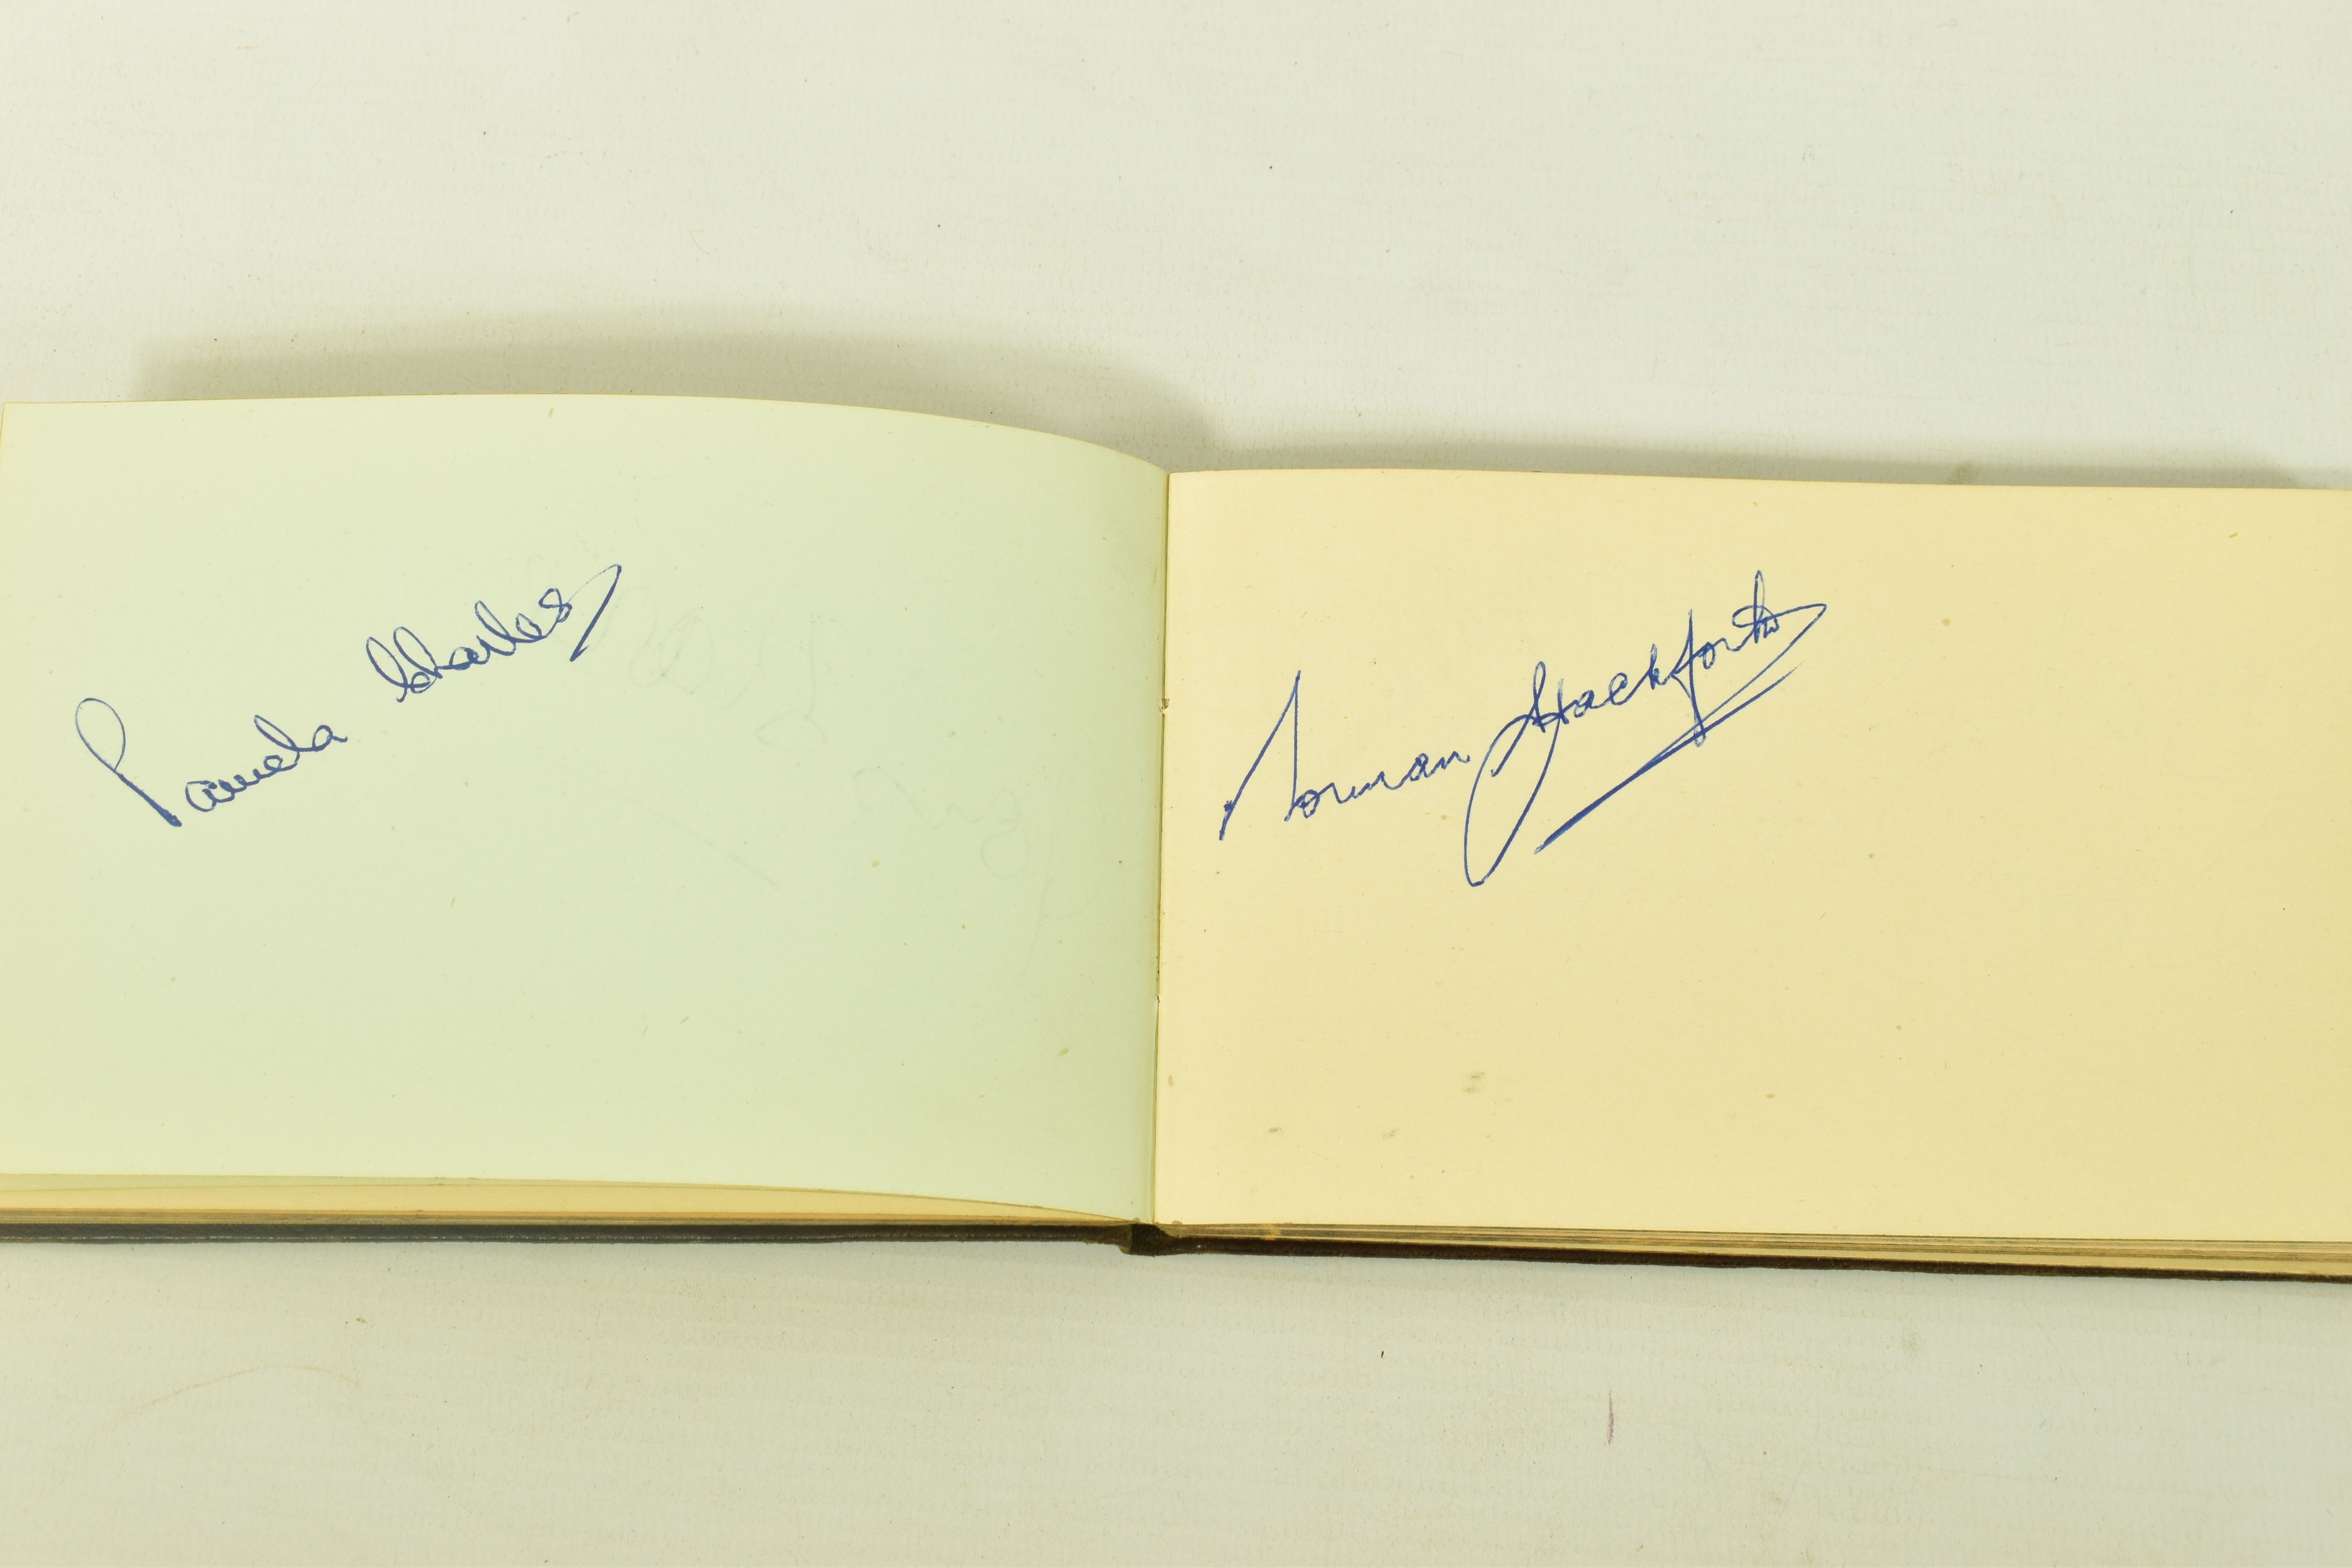 FILM & STAGE AUTOGRAPH ALBUM, a collection of signatures in an autograph album featuring some of the - Image 7 of 9